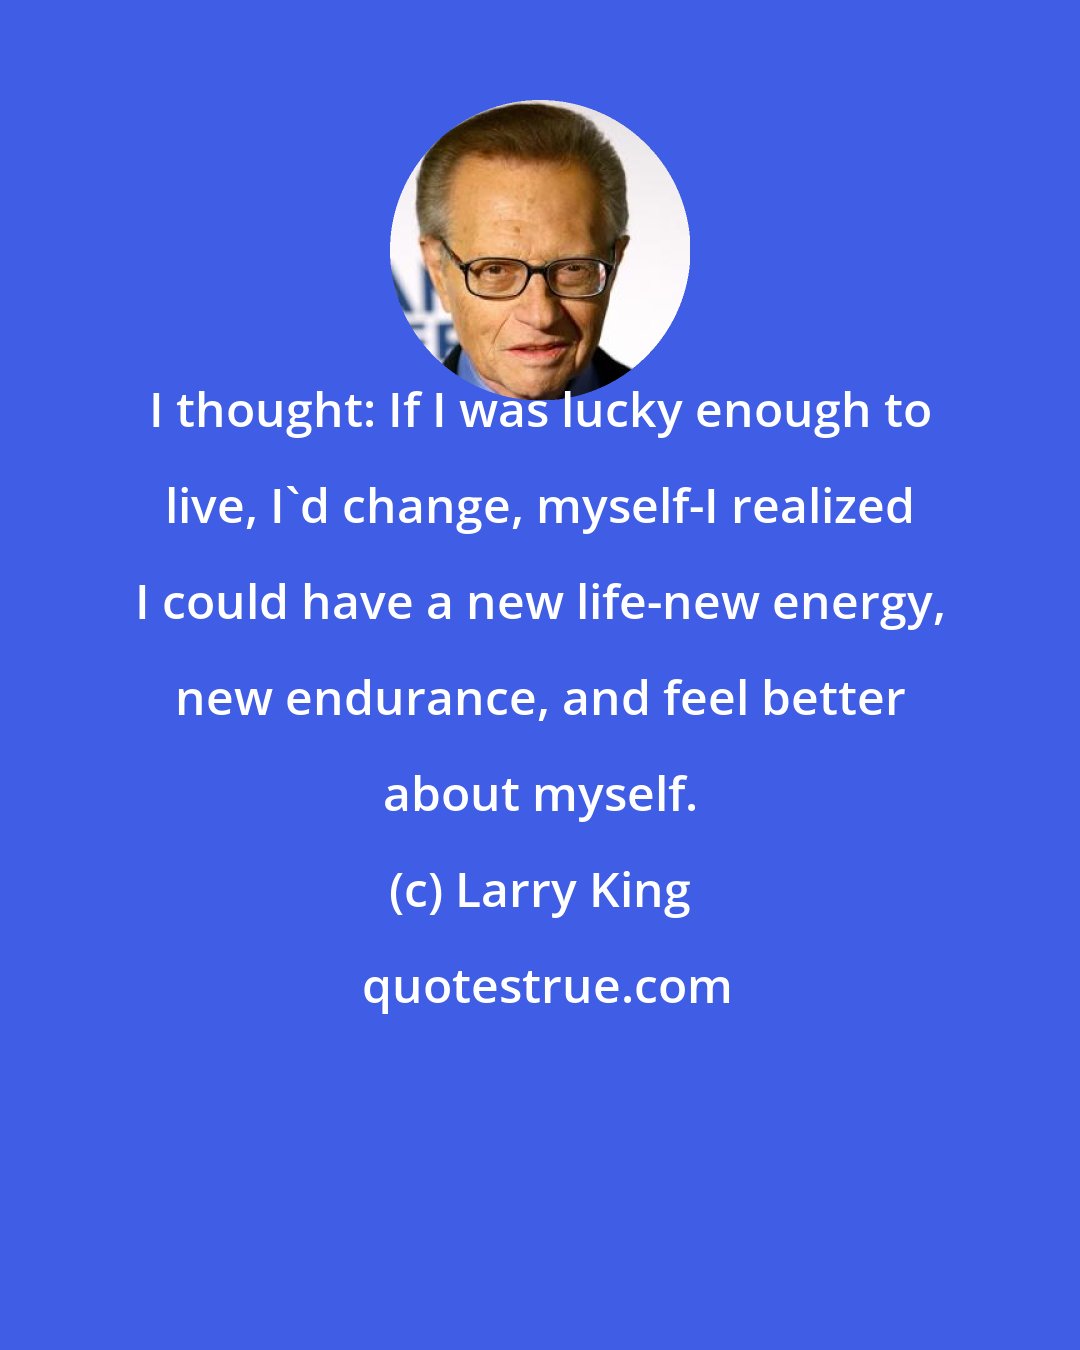 Larry King: I thought: If I was lucky enough to live, I'd change, myself-I realized I could have a new life-new energy, new endurance, and feel better about myself.